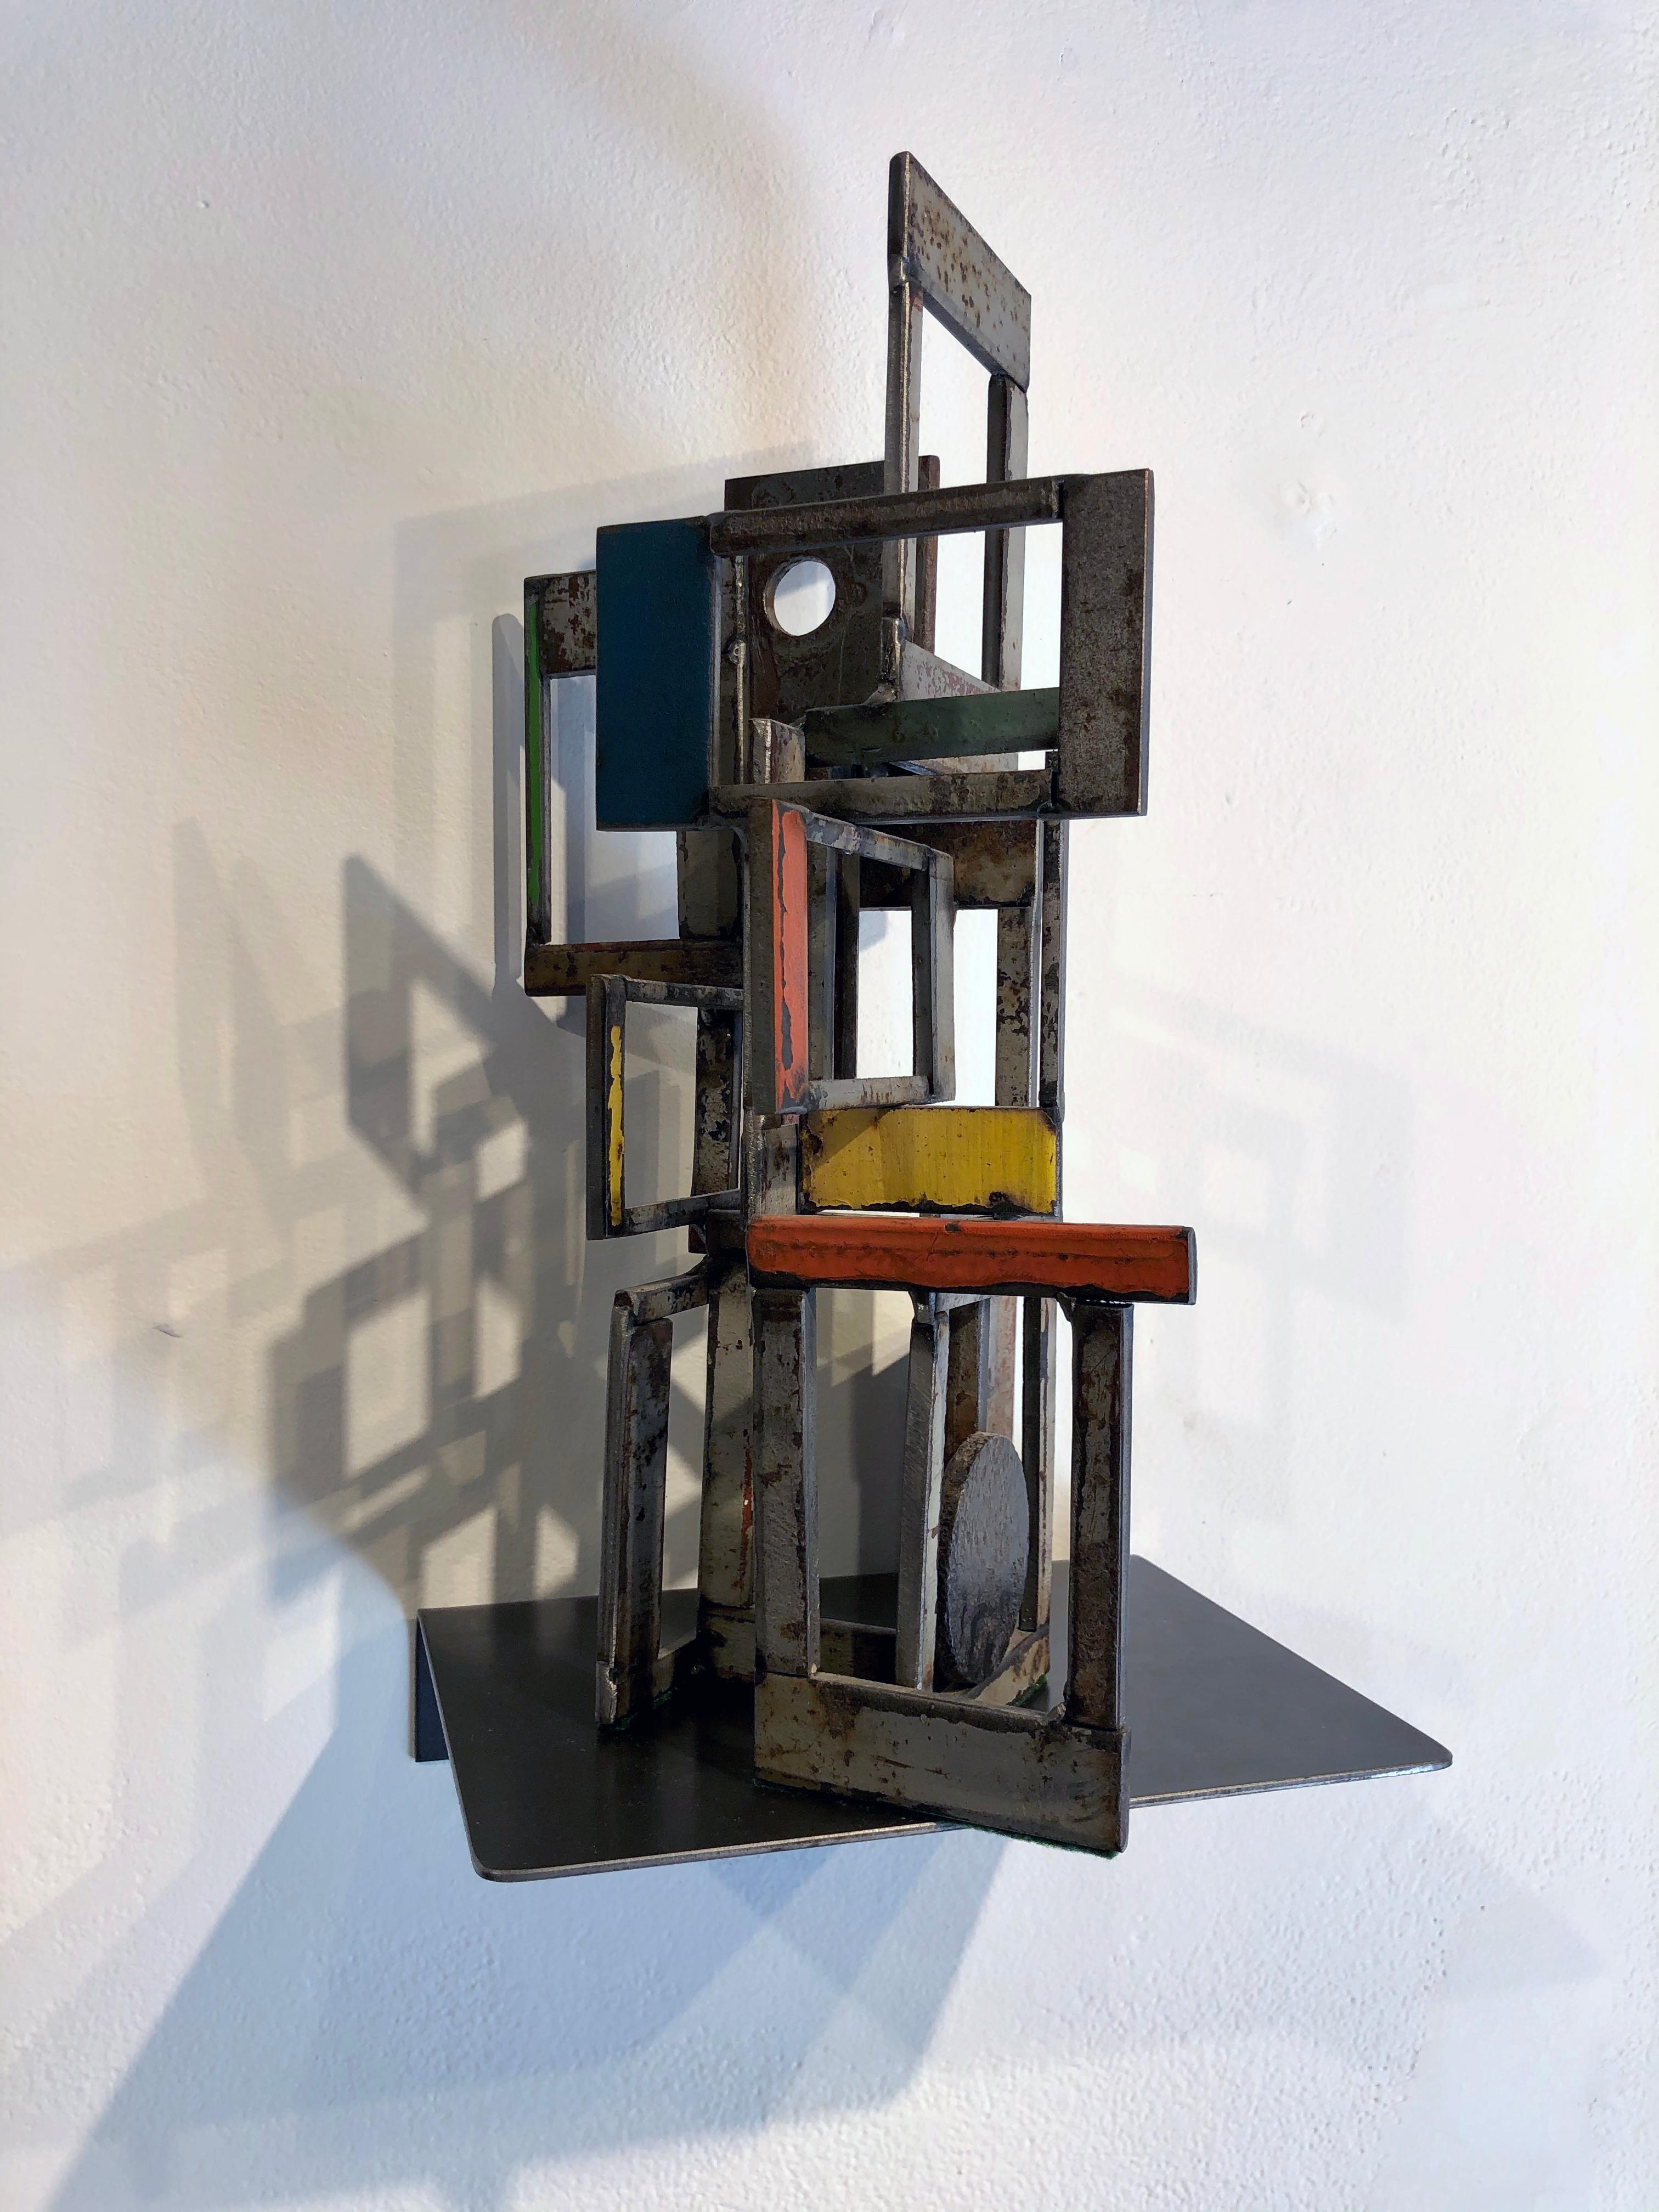 Object 1978, Steel Structure, Welded Sculptural Object Made w/ Salvaged Steel 1